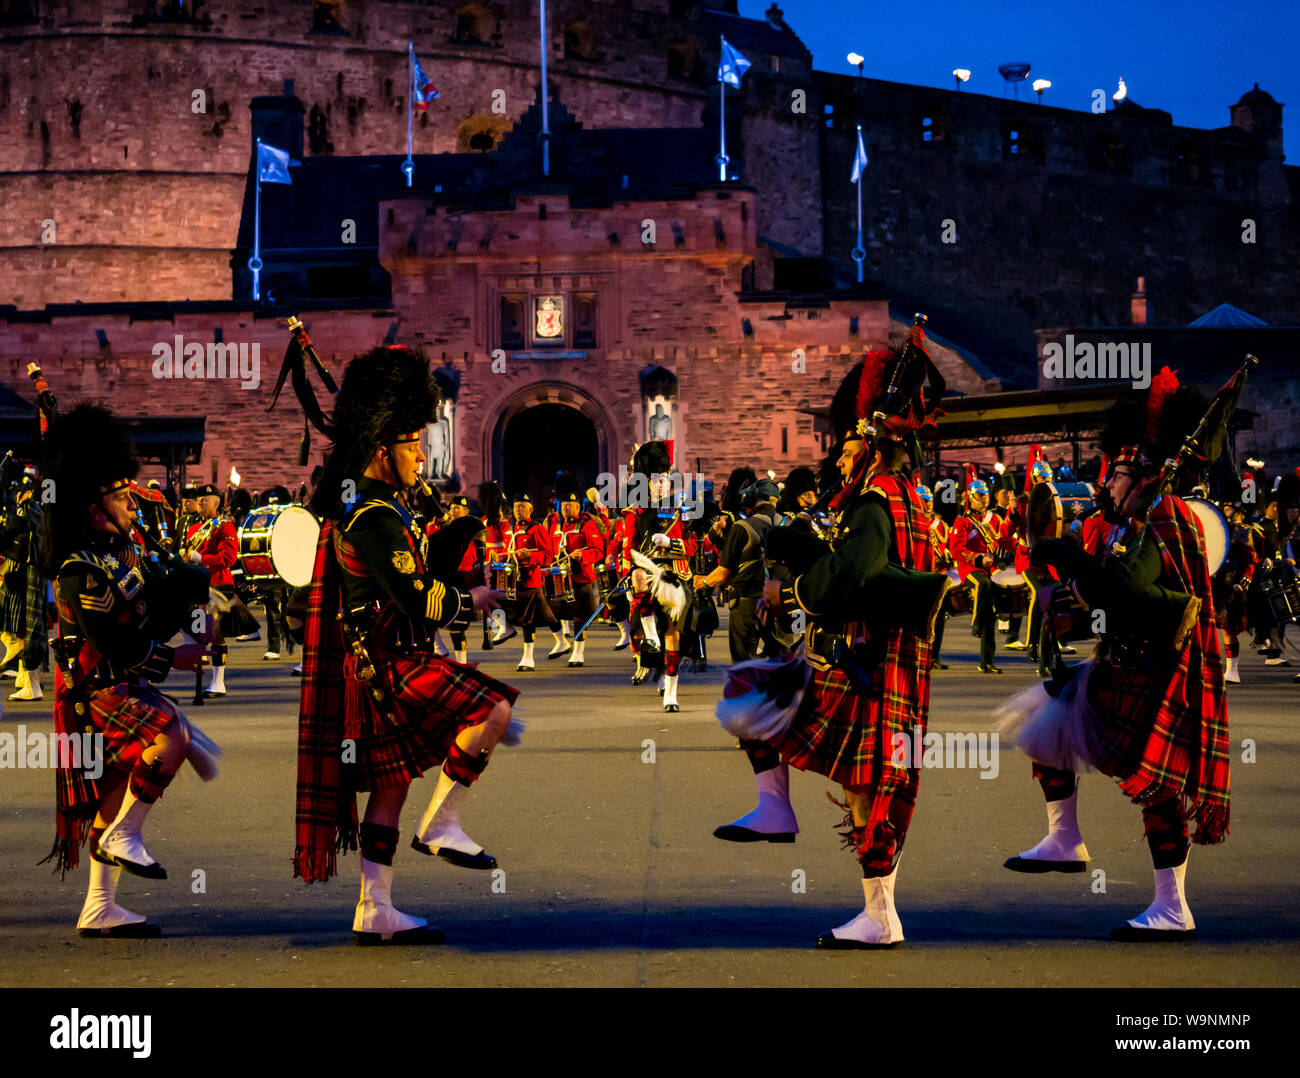 Edinburgh, Scotland, UK. 14th Aug 2019. Royal Edinburgh Military Tattoo 2019 Kaleidoscope on Castle Esplanade in its 69th show inspired by the optical instrument by Scottish scientist Sir David Brewster and Sir Isaac Newton's seven colours. It features traditional Massed Pipes and Drums. A marching band playing bagpipes in Scottish military uniform with kilts and puttees Stock Photo